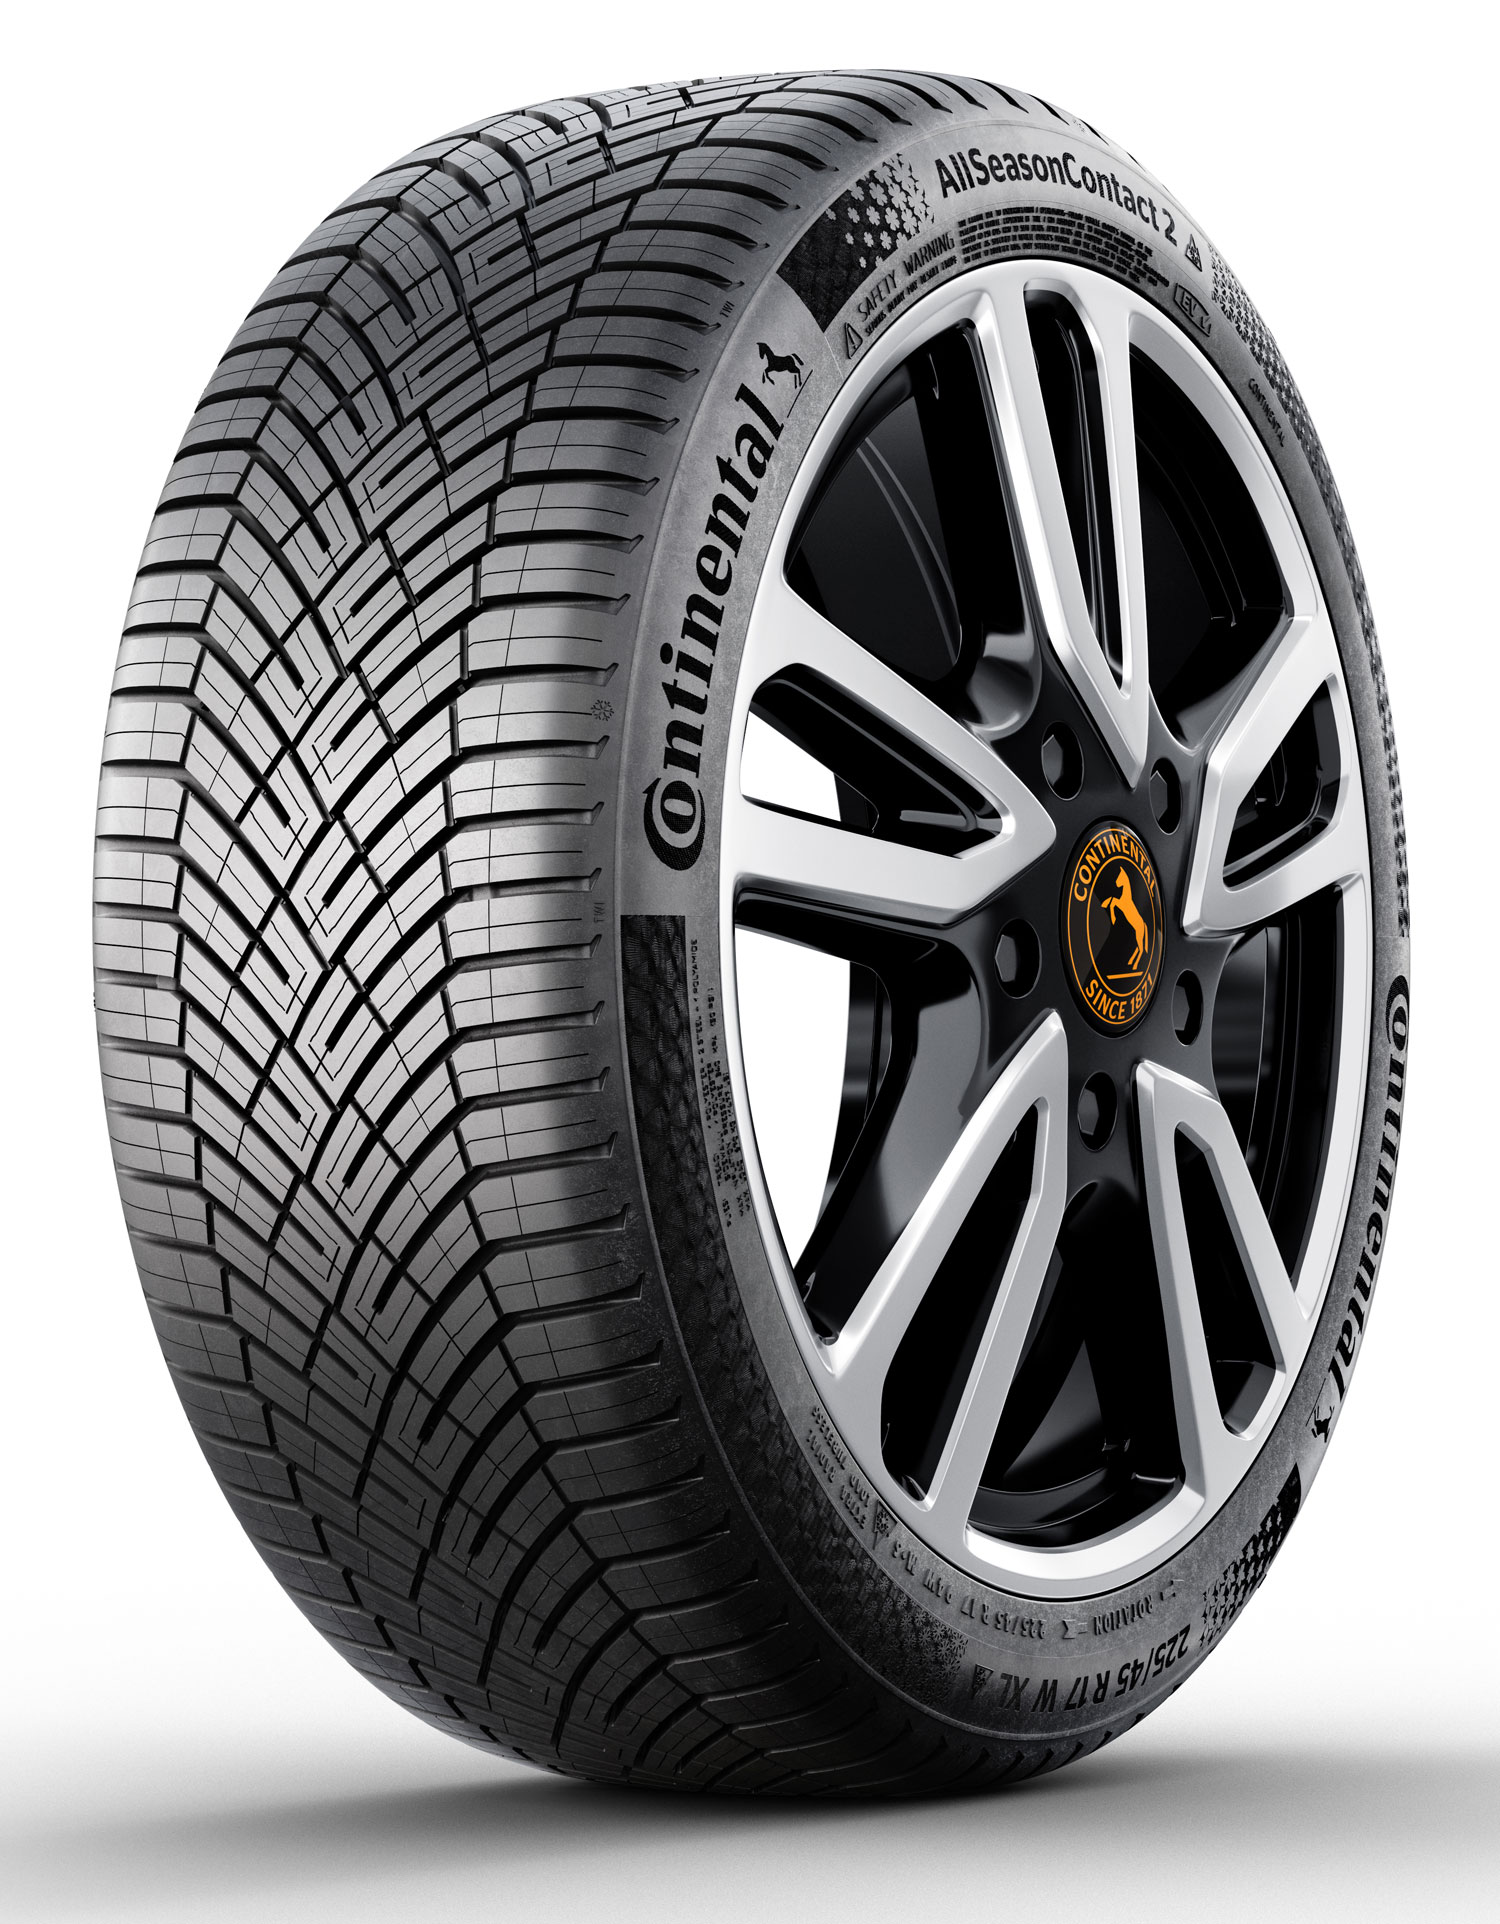 Gomme Nuove Continental 235/55 R19 101T ALLSEASONCONTACT 2 M+S pneumatici nuovi All Season